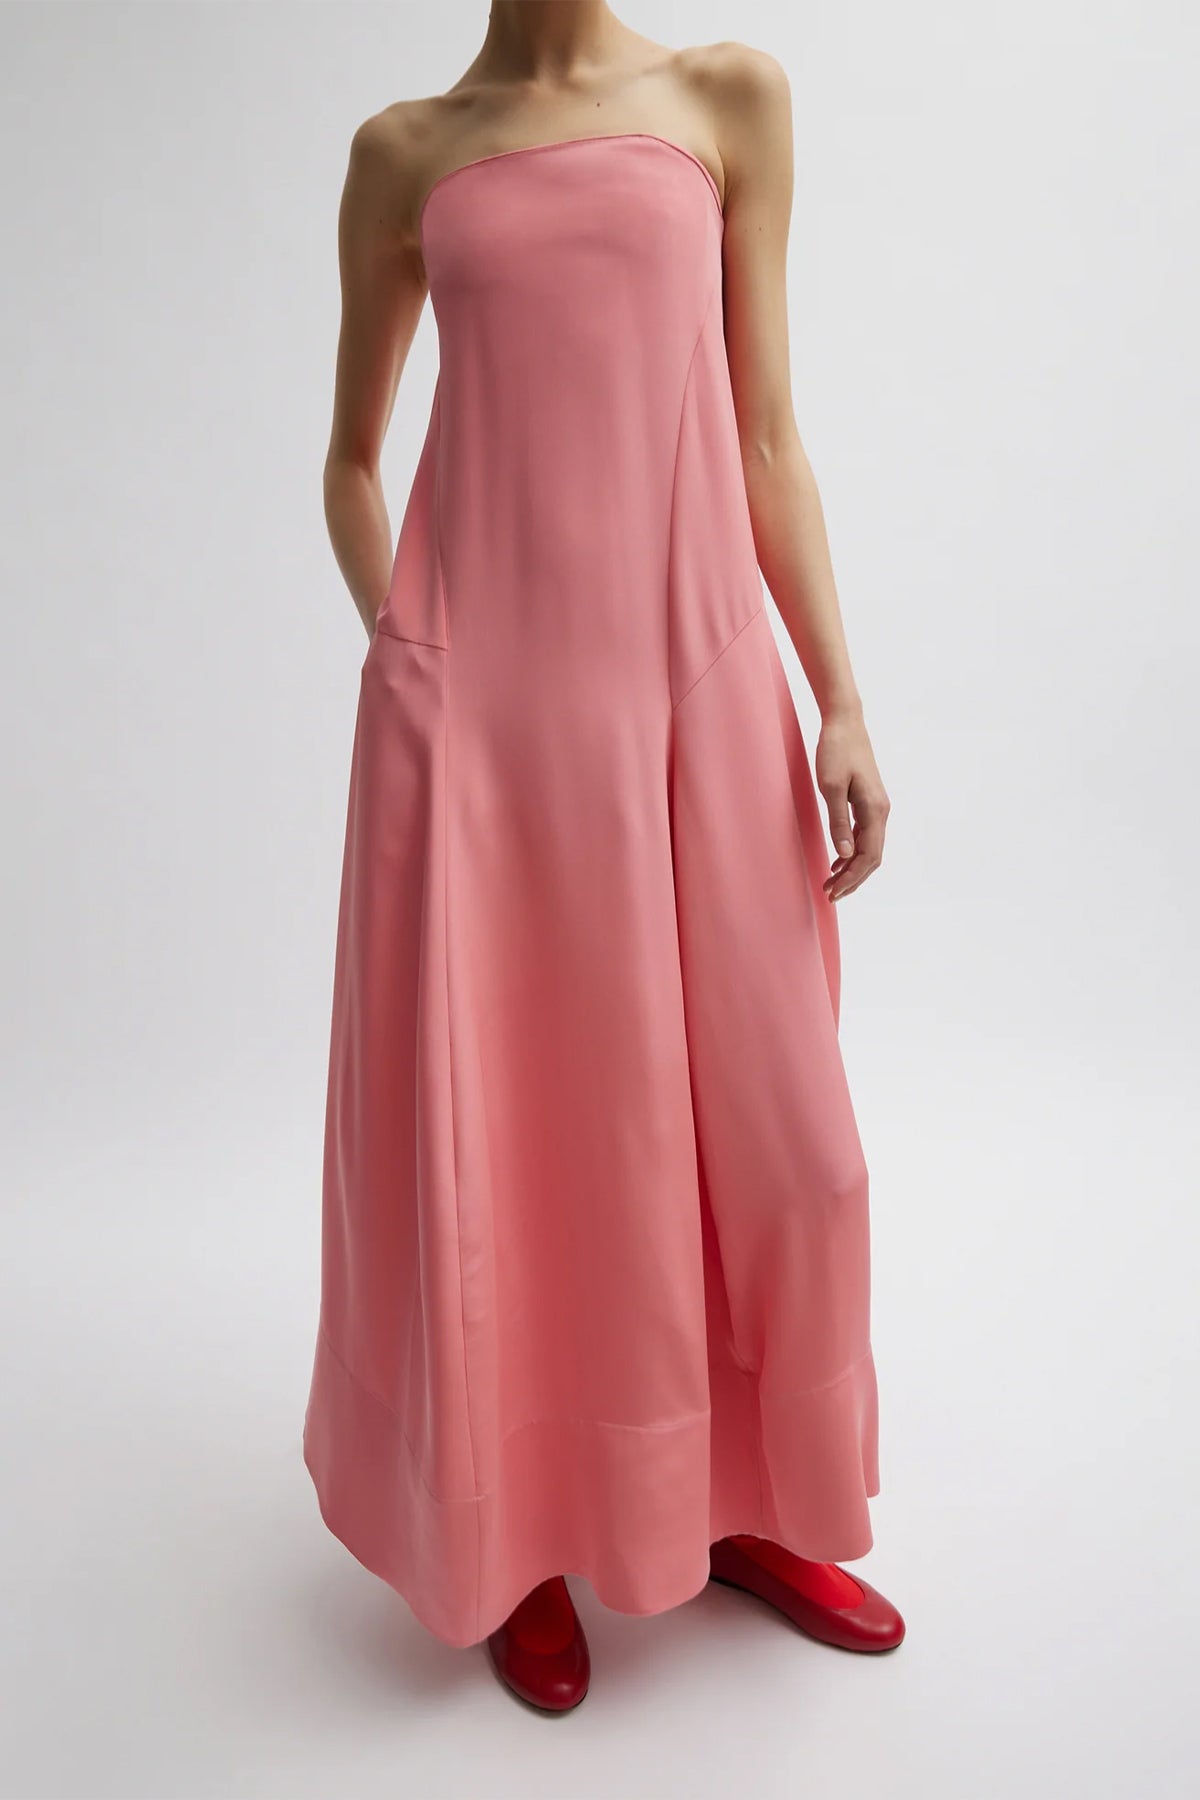 4 Ply Silk Strapless Sculpted Dress in Pink - shop-olivia.com